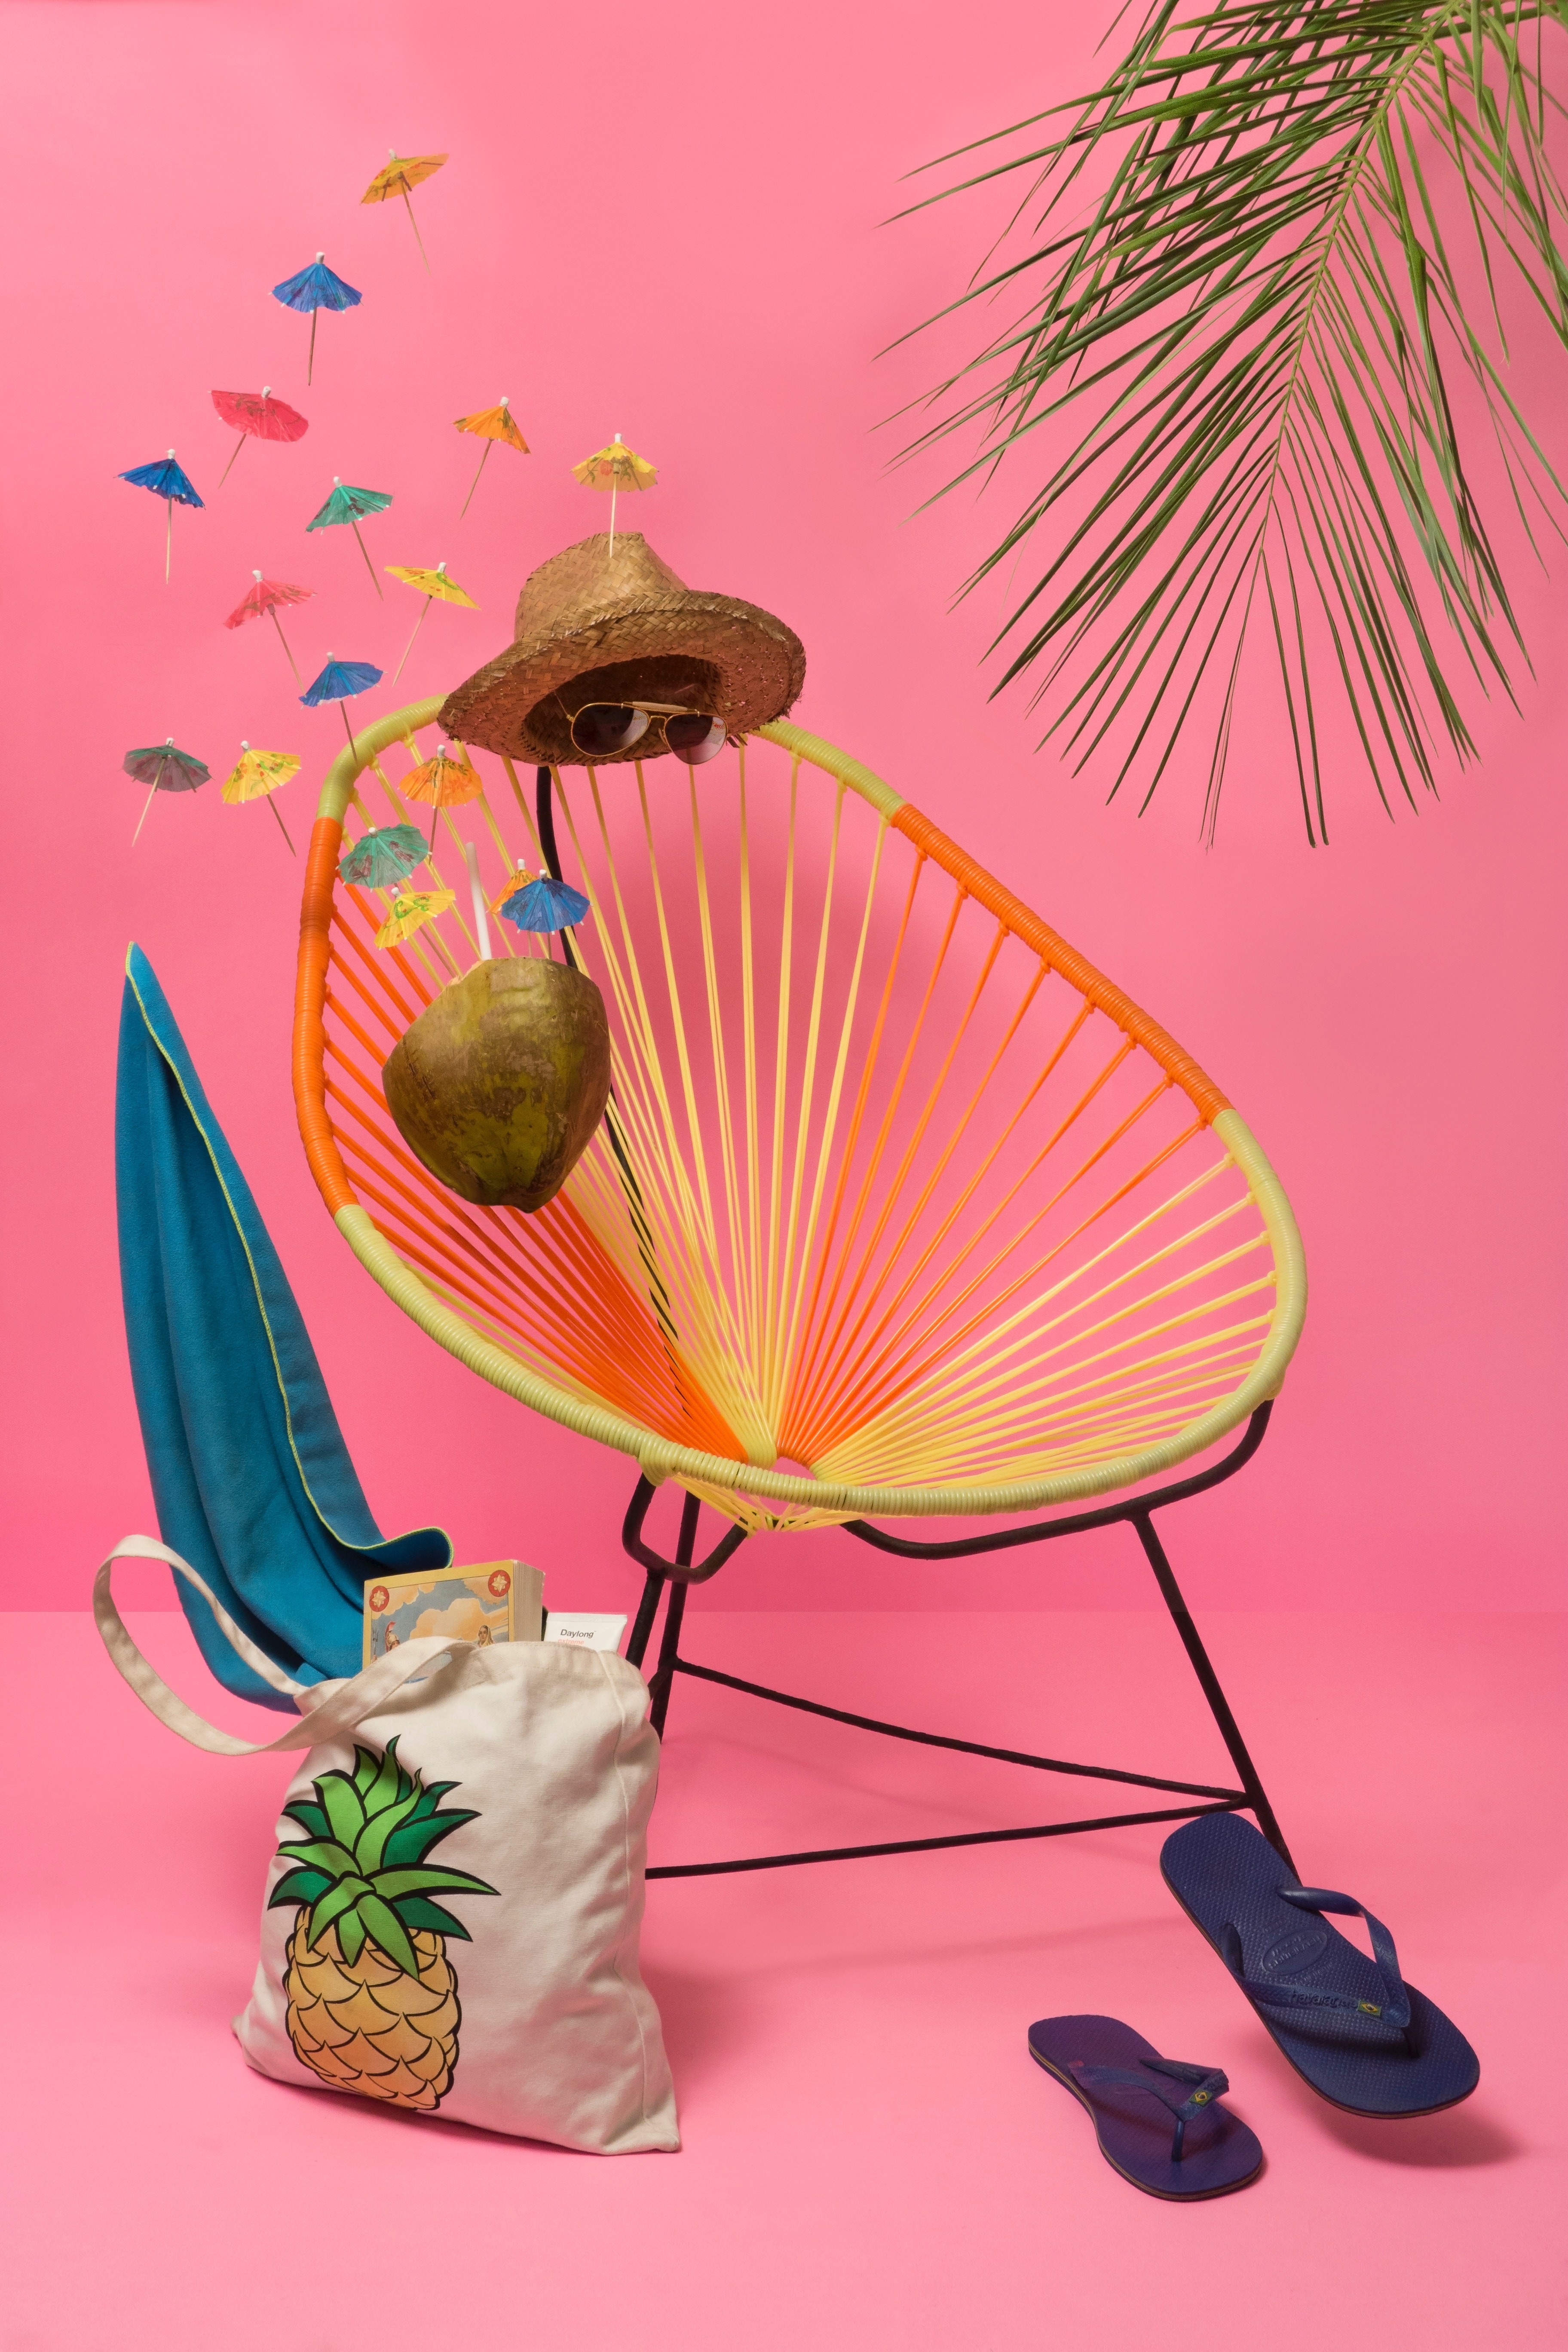 Photo of a circular lounge chair with floating sunglasses, a hate, a coconut drink, and flip flops like an invisible person is sitting in the chair